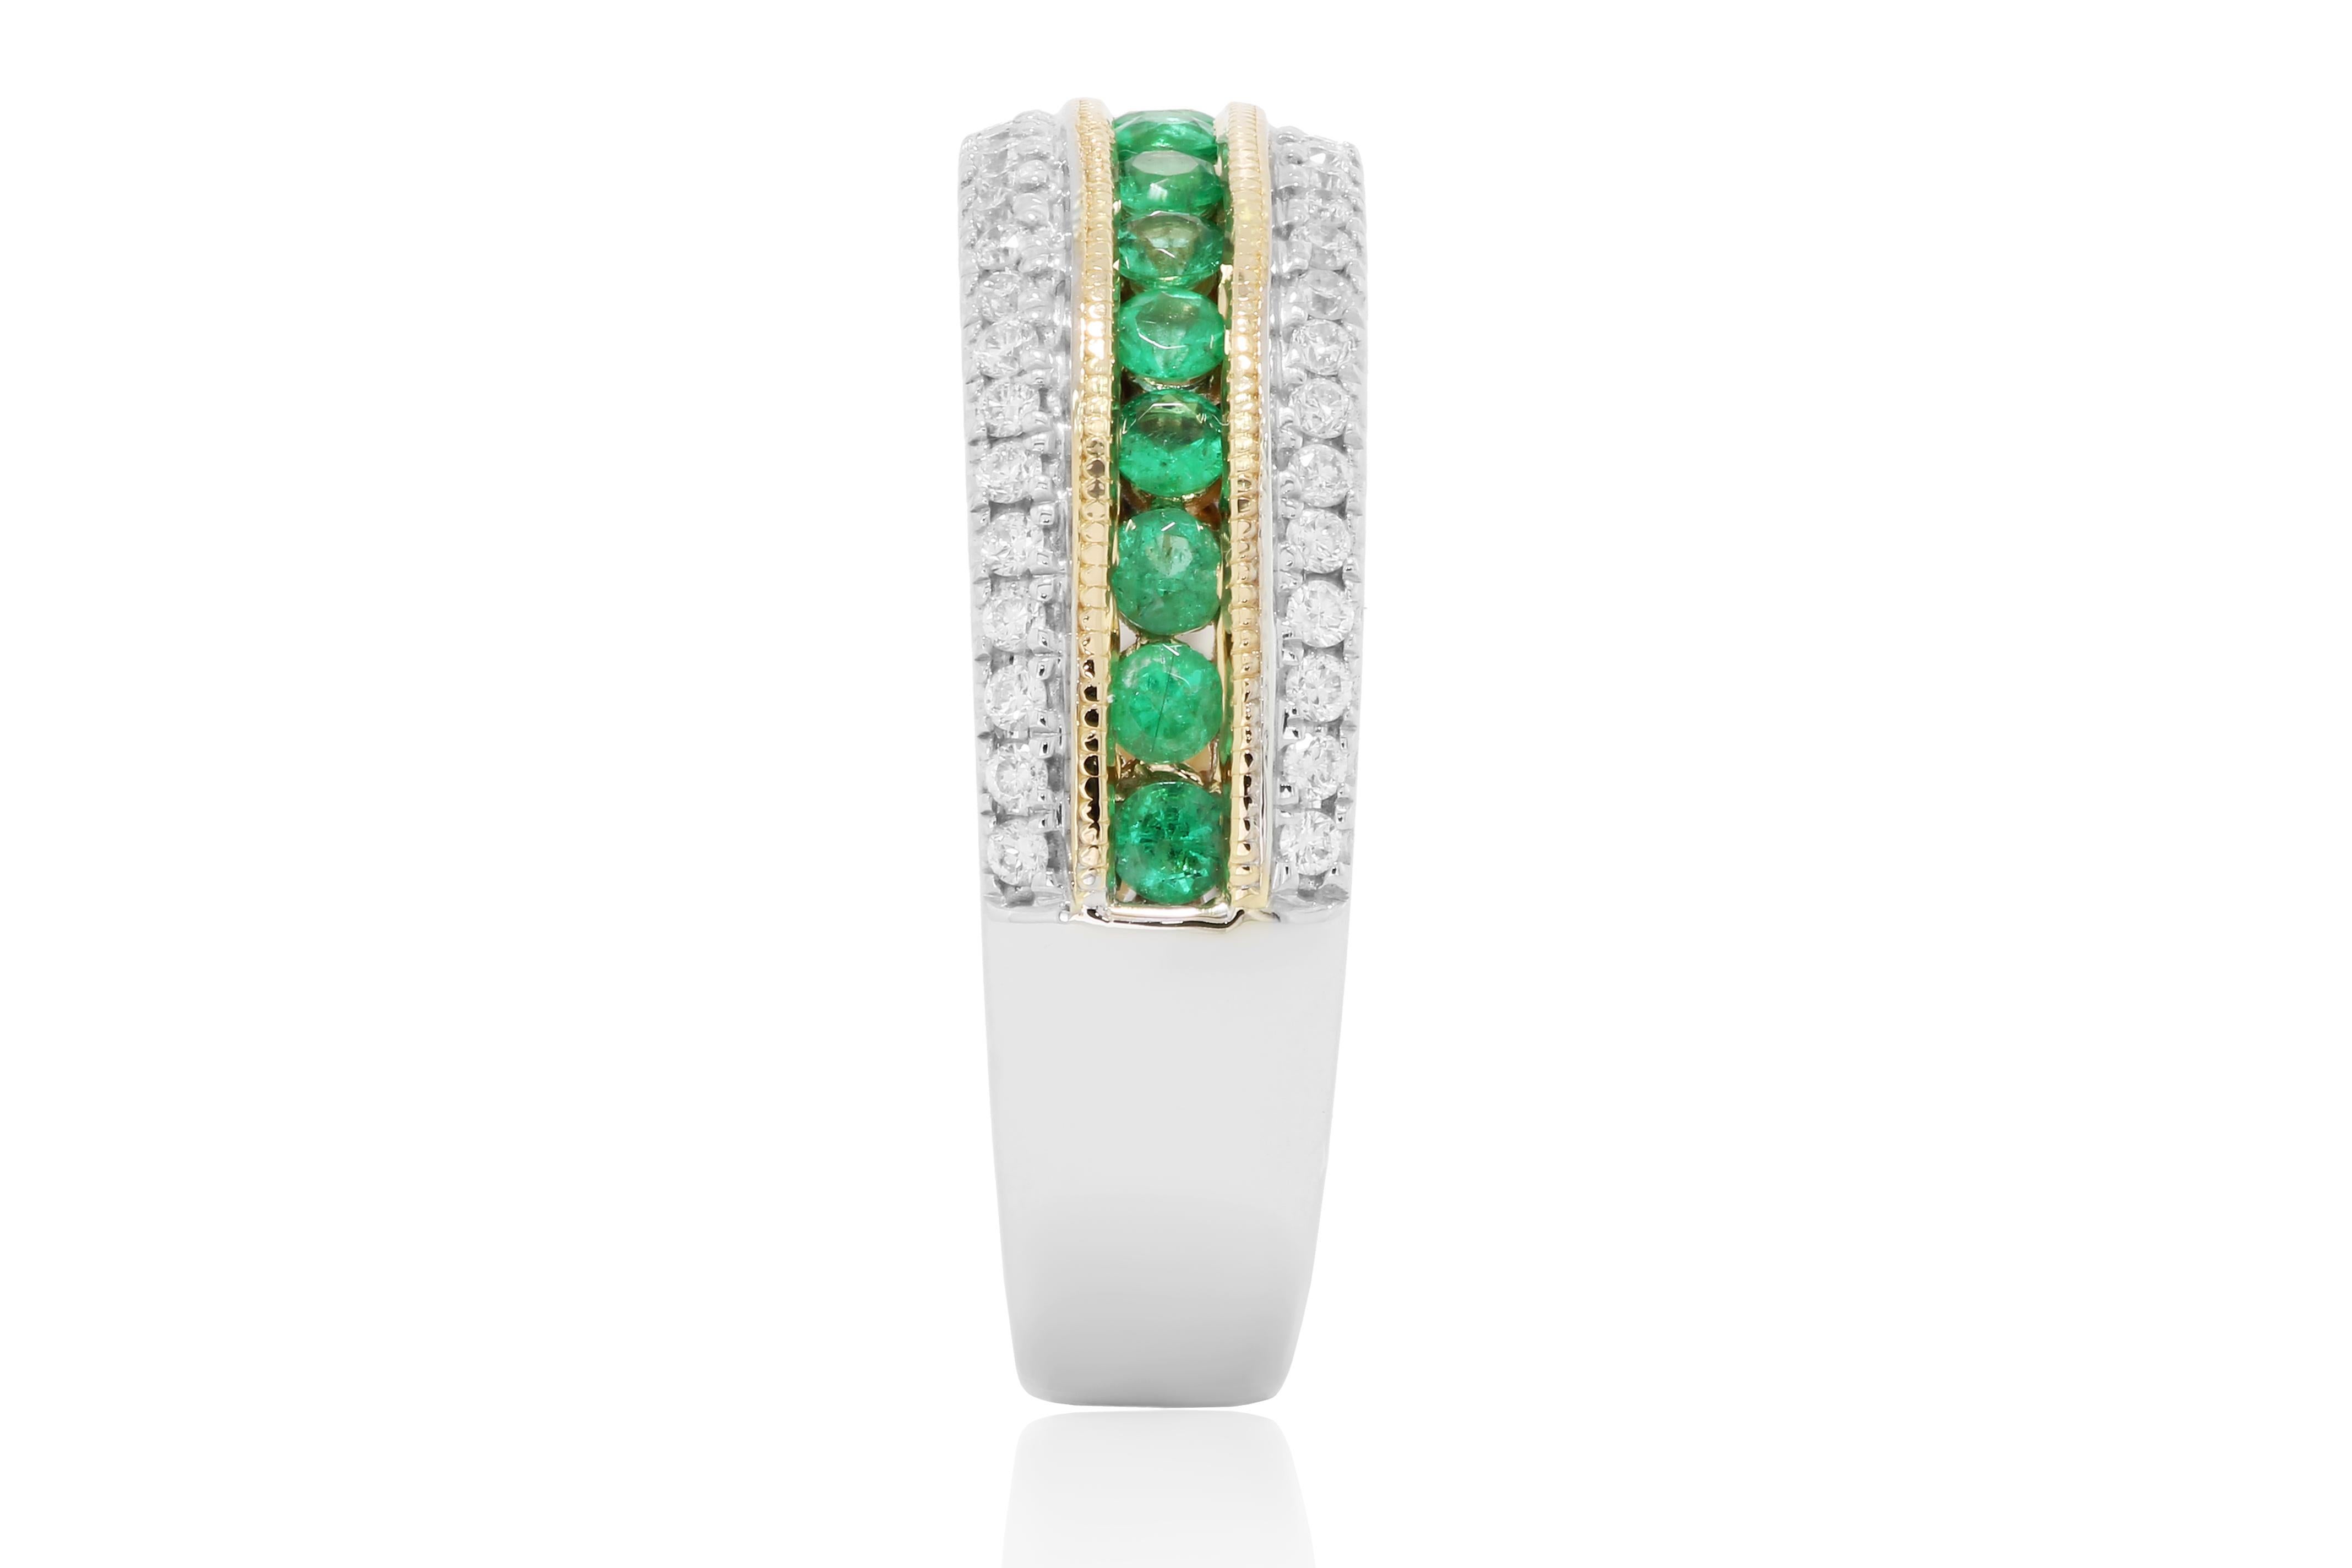 Emerald Rounds 0.34 Carat Flanked with Row of White Round Diamond on the sides 0.23 Carat in 18K White and Yellow Gold Stunning Channel Set Cocktail Fashion Band Ring 

Emerald Weight 0.34 Carat
Total Weight 0.57 Carat